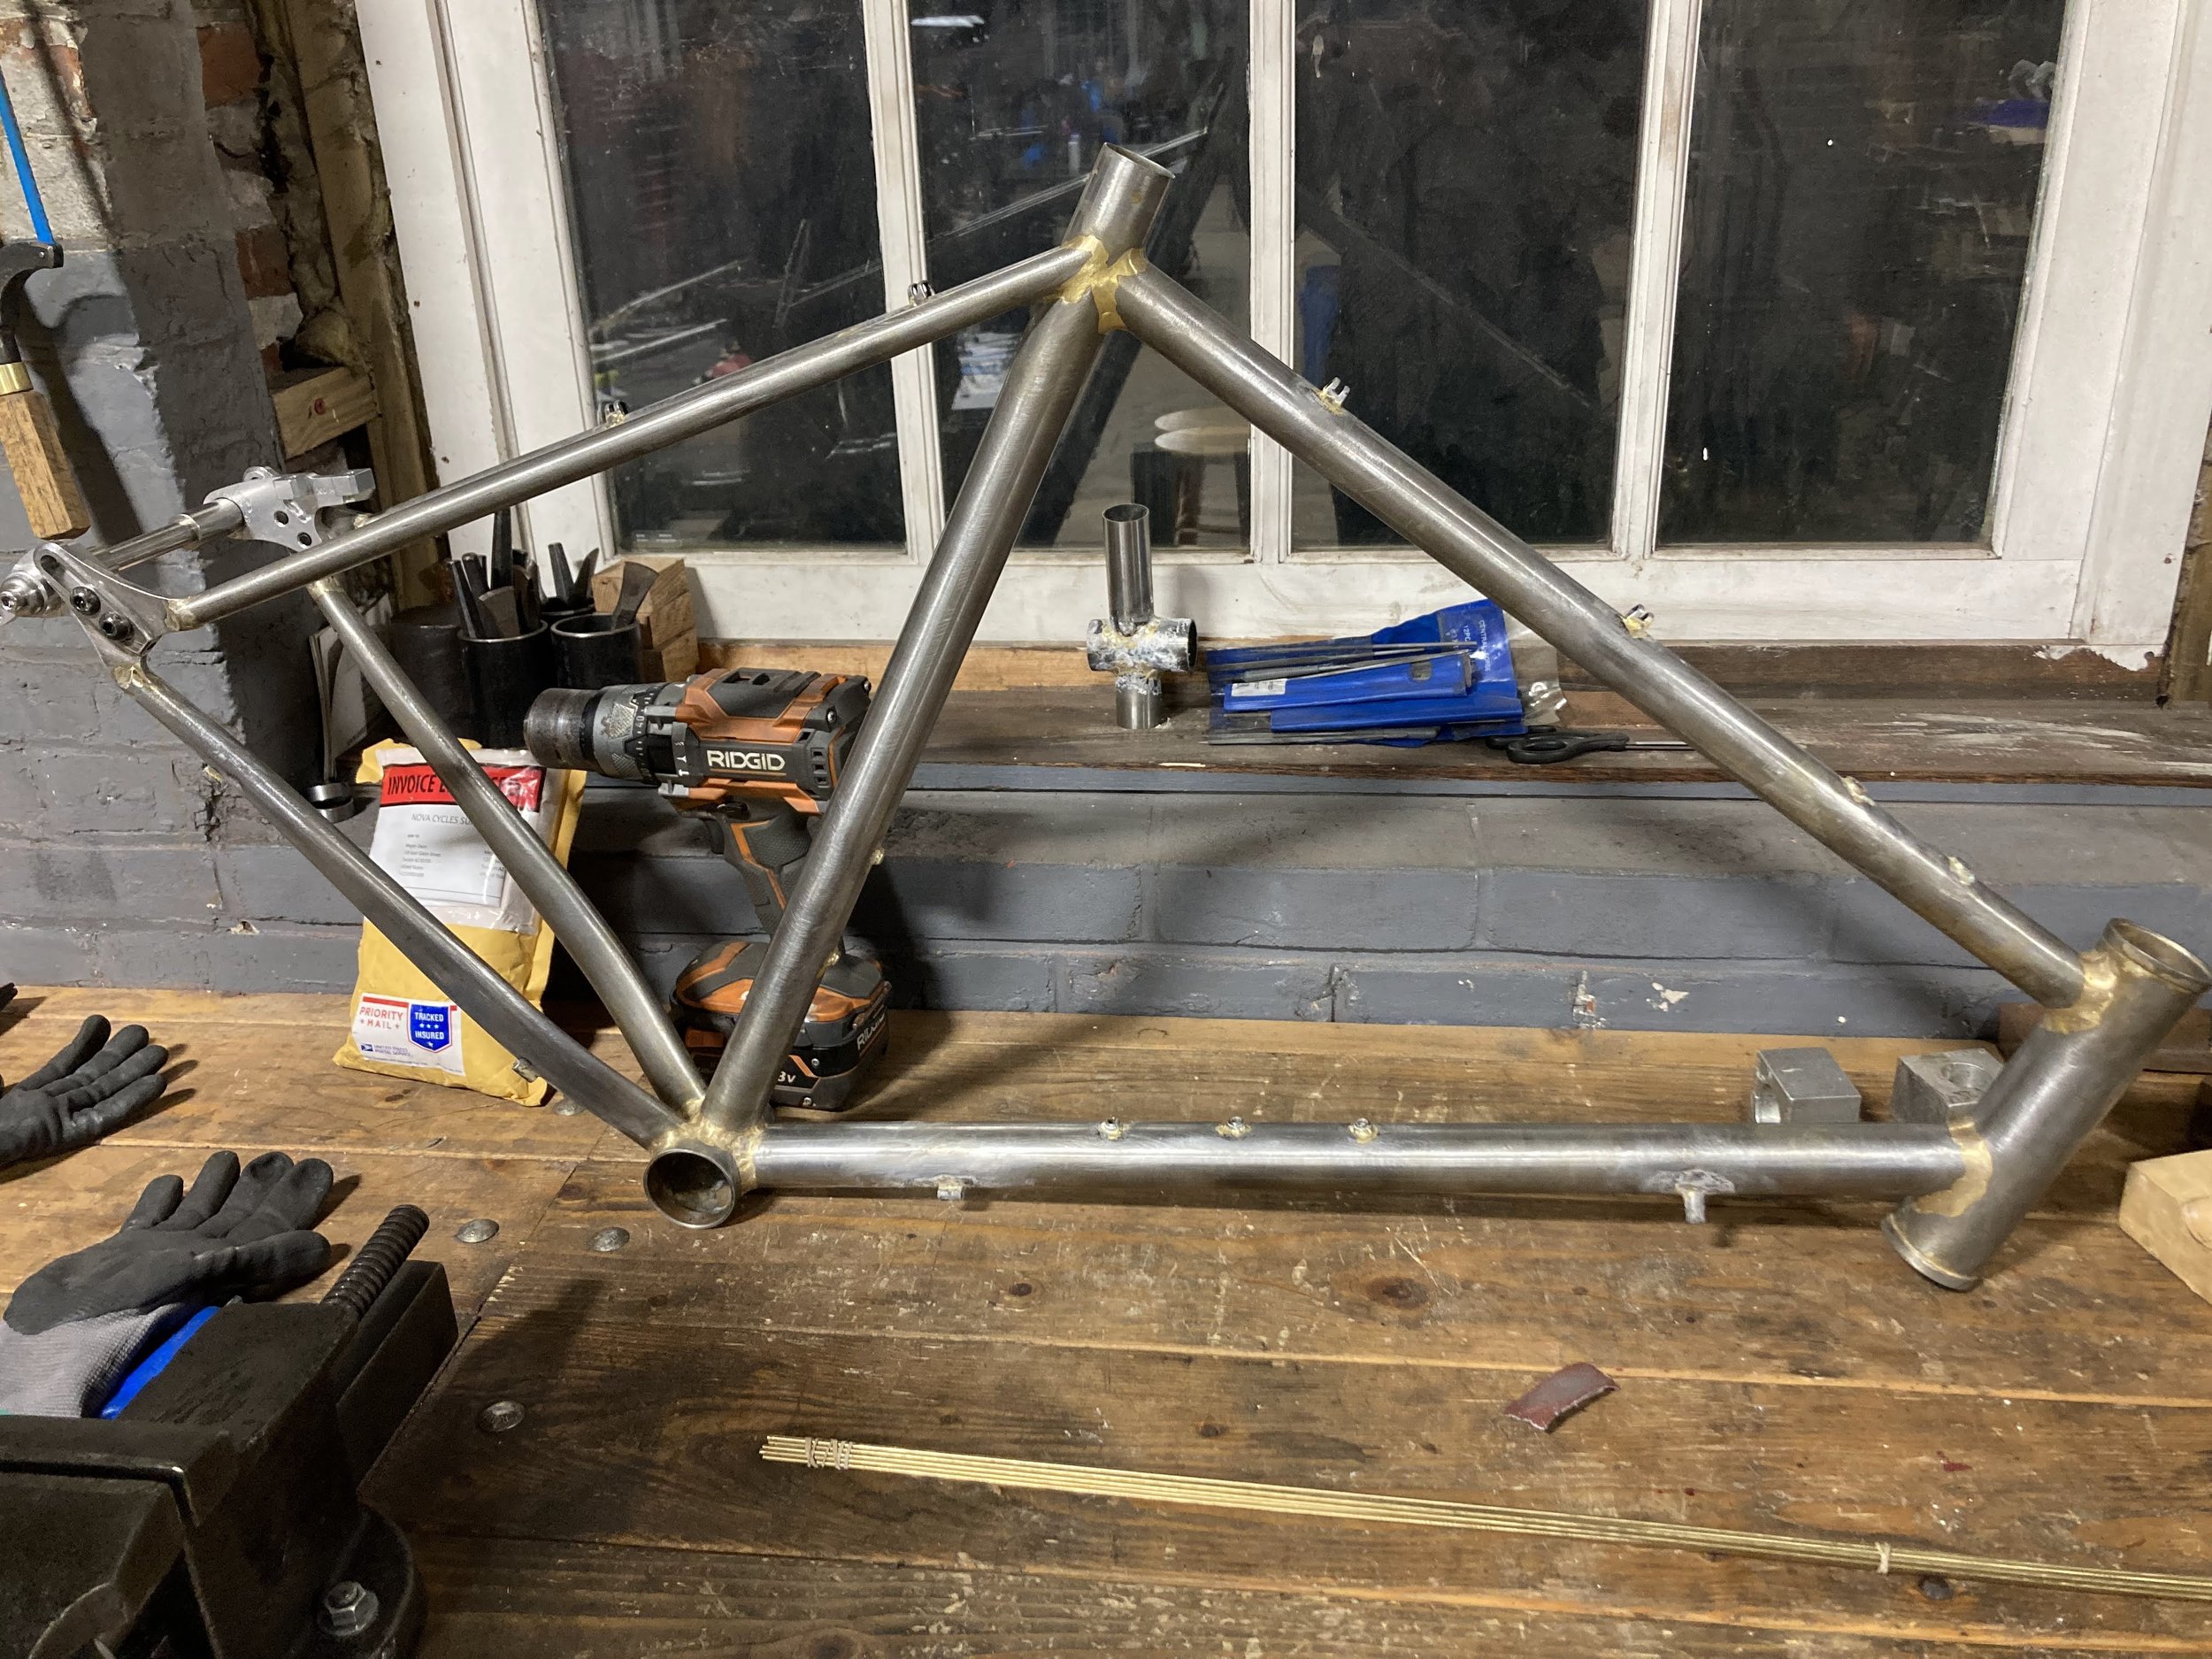  “Complete” frame, after brazing on cable guides and cage/bag mounts. 